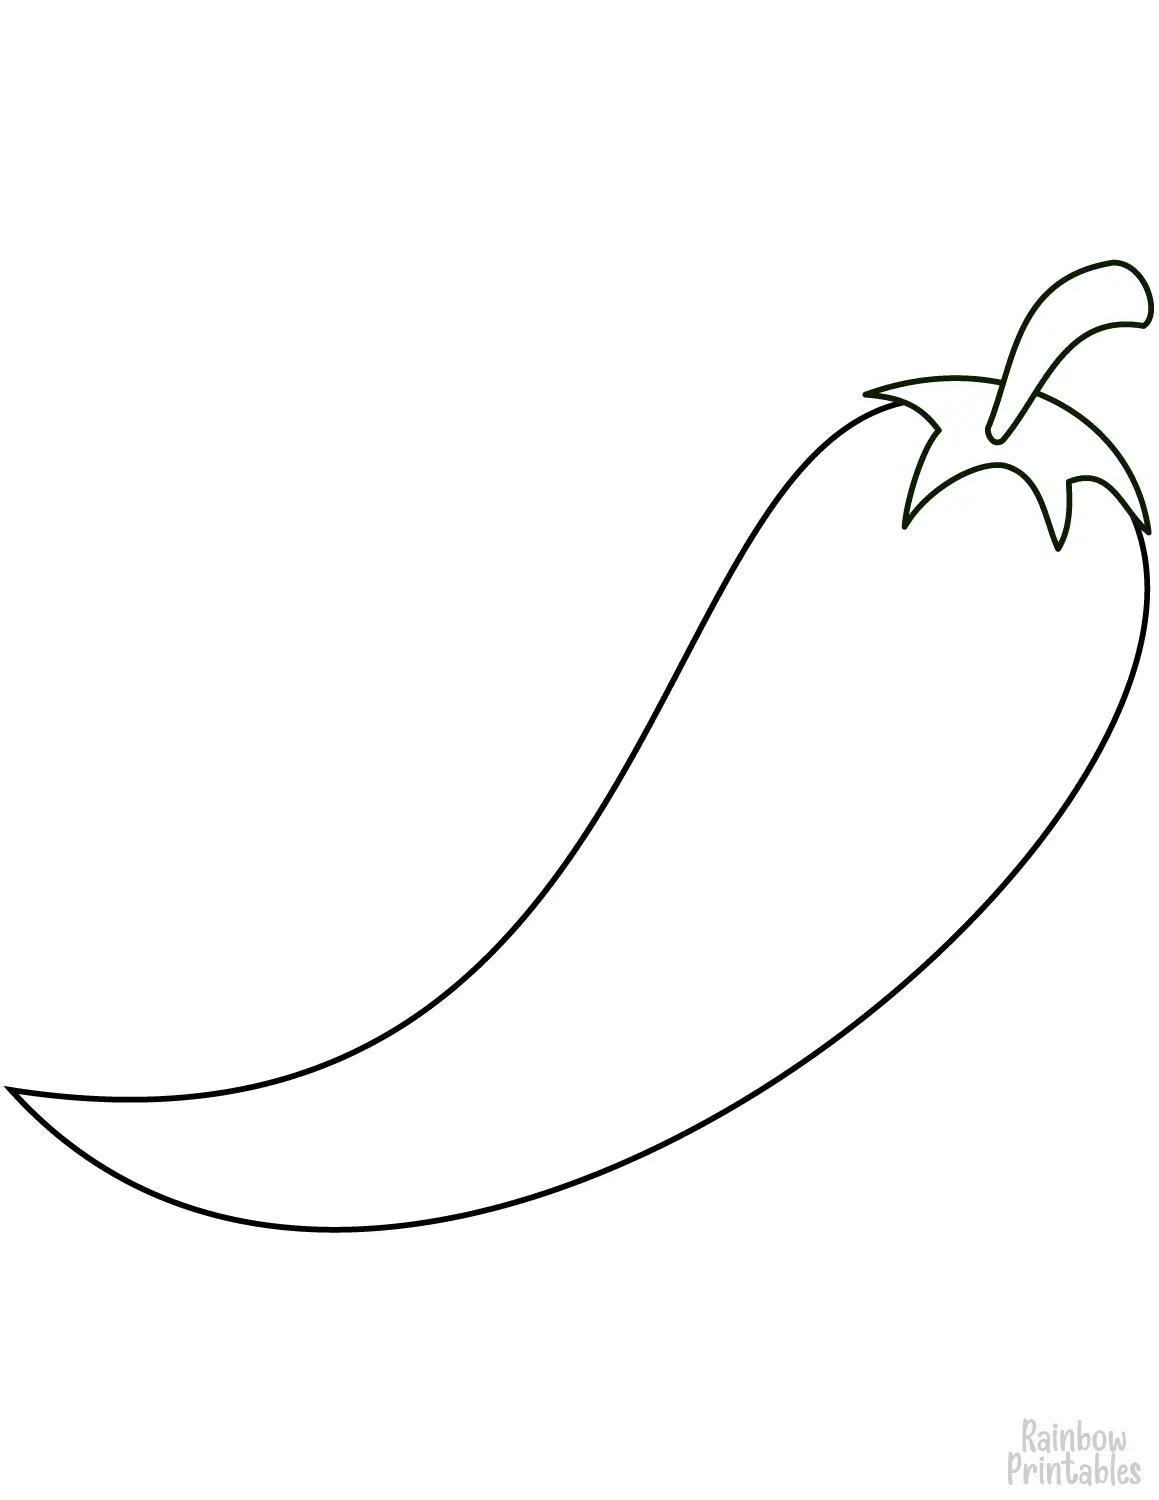 Line Drawing CHILI HOT PEPPER Coloring Pages for Kids Art Project